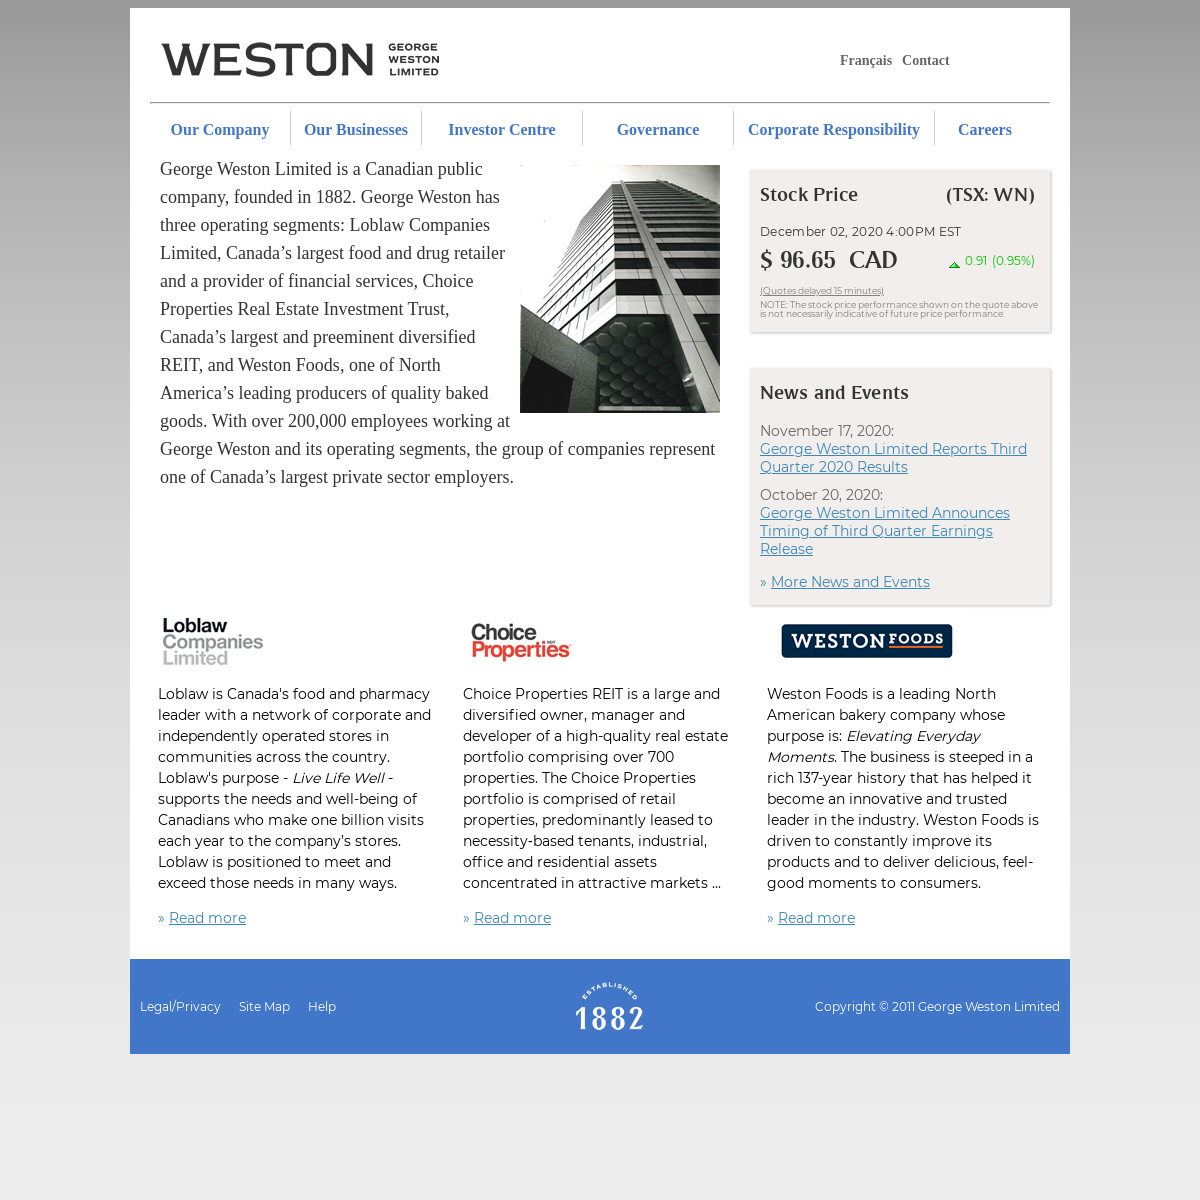 A complete backup of weston.ca